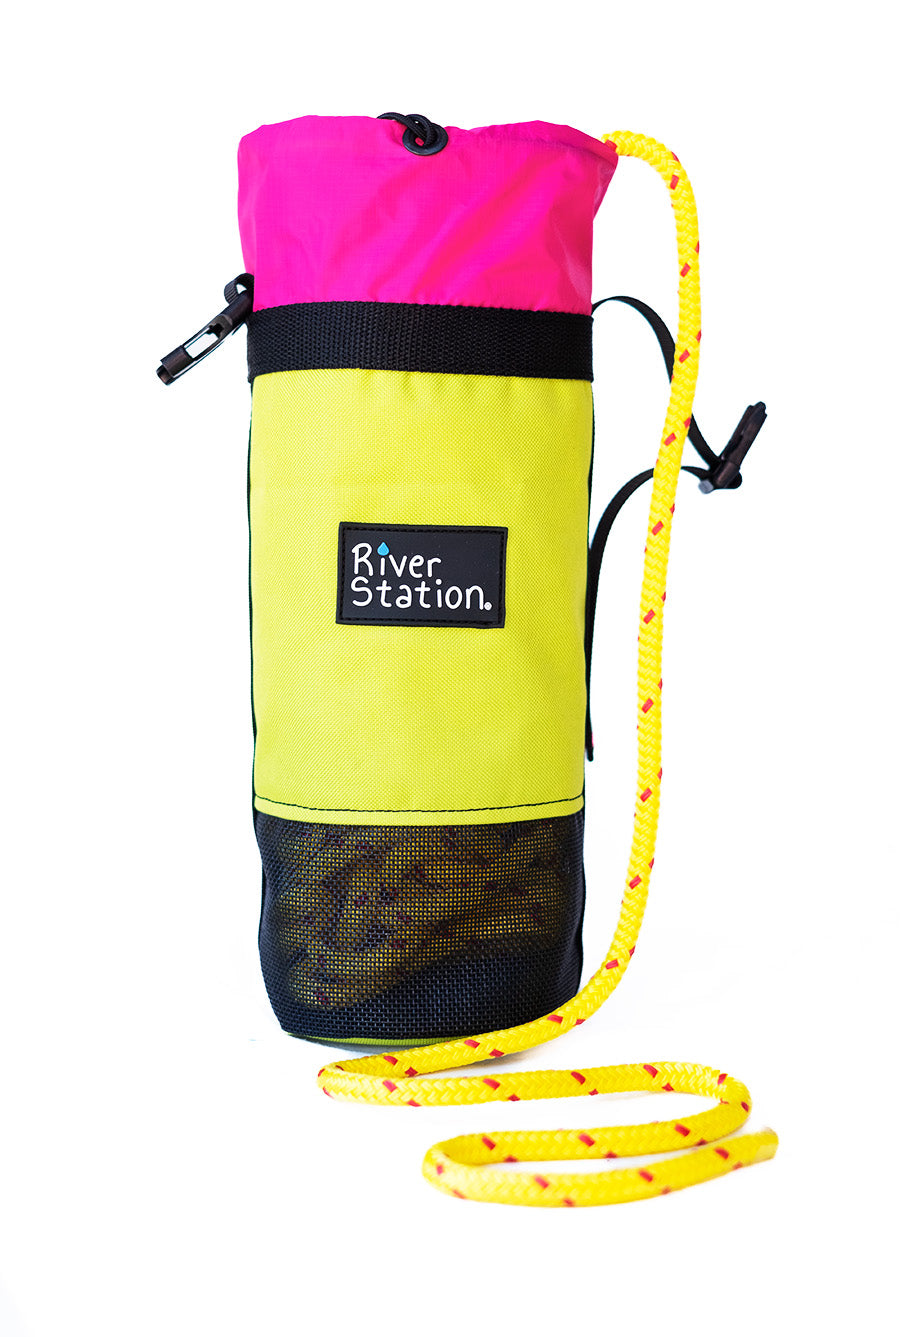 rescue throw bag for swift water rescue